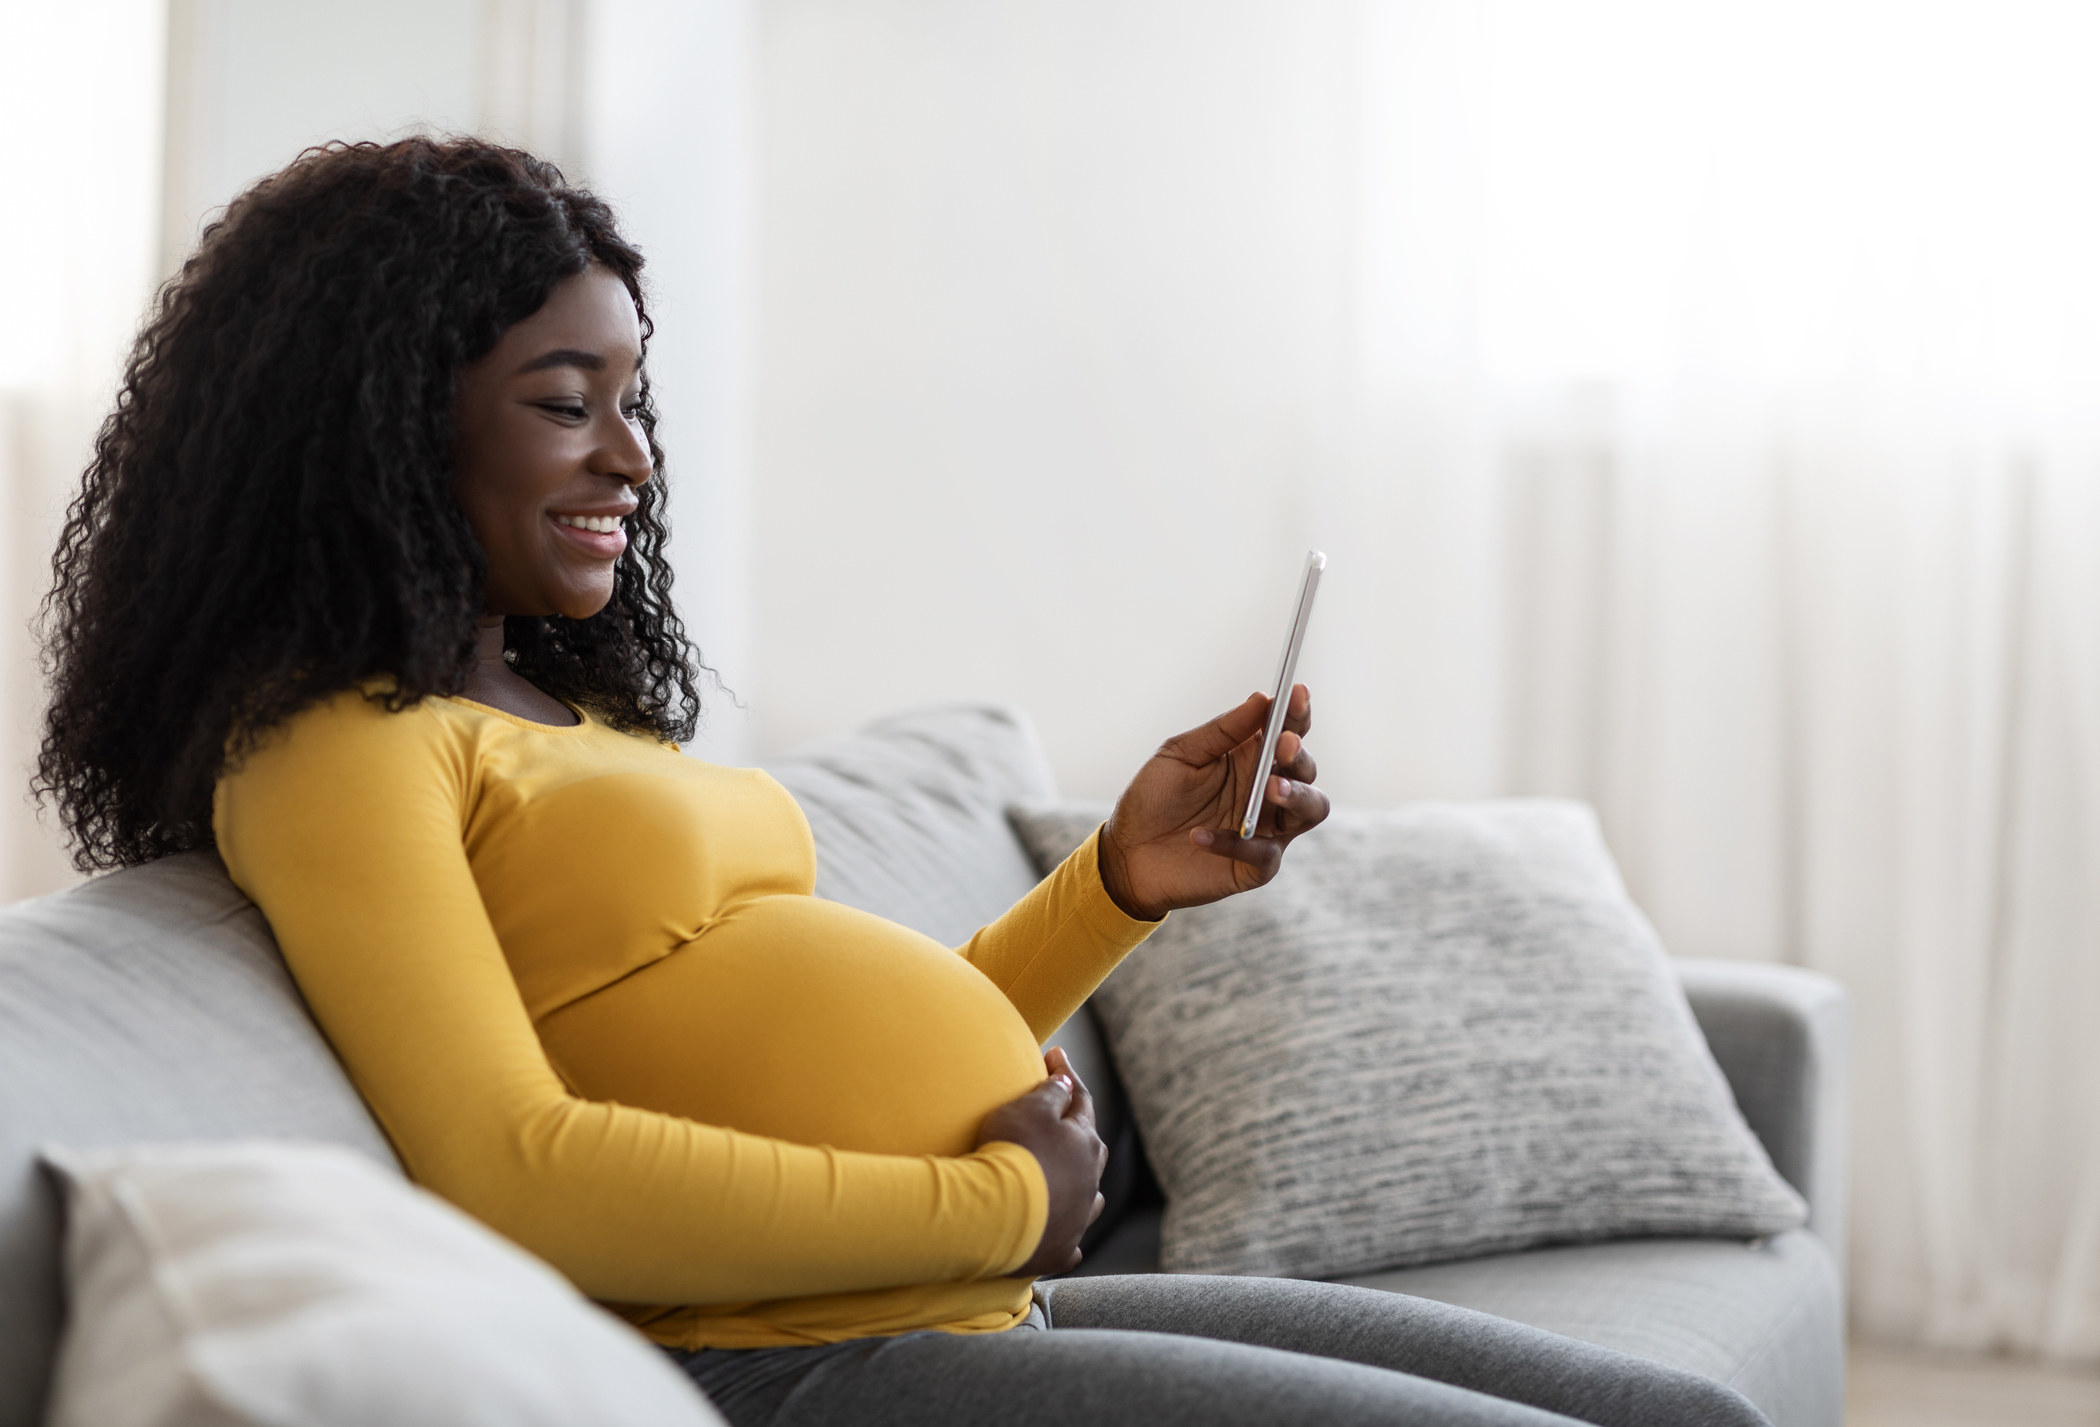 A pregnant woman reclines on her sofa while looking at her phone and smiling